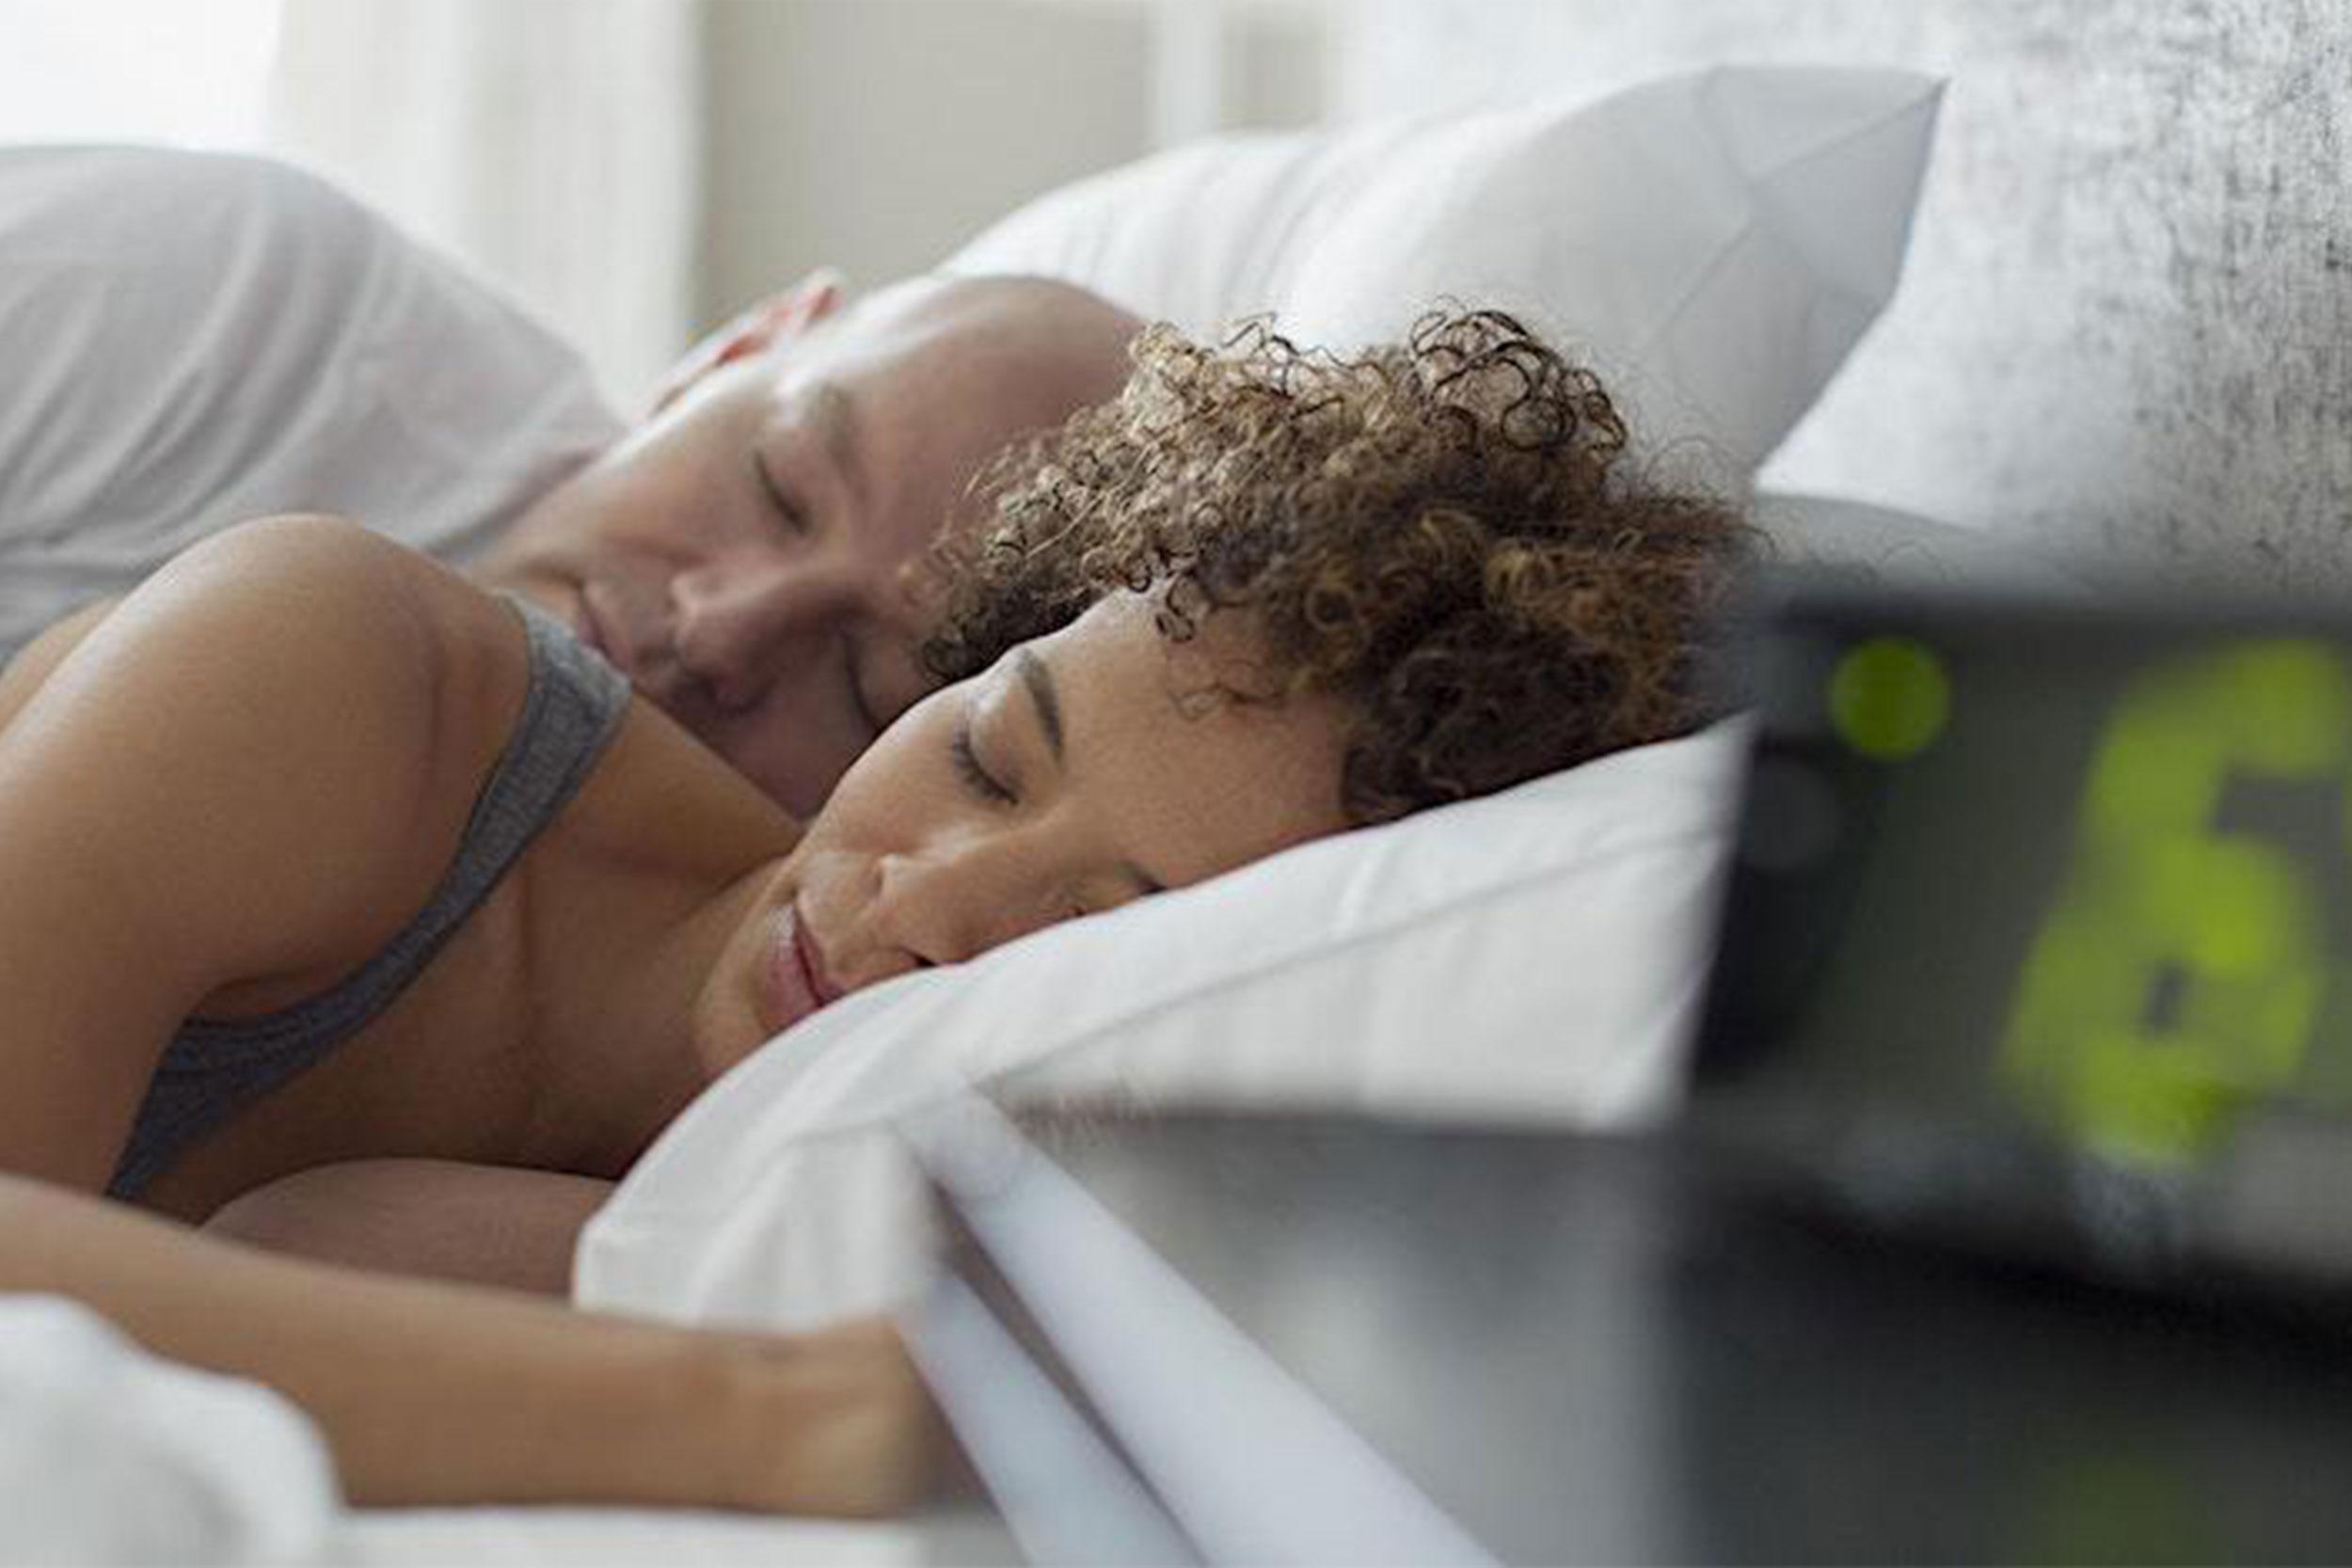 Man and woman sound asleep in bed next to digital alarm clock